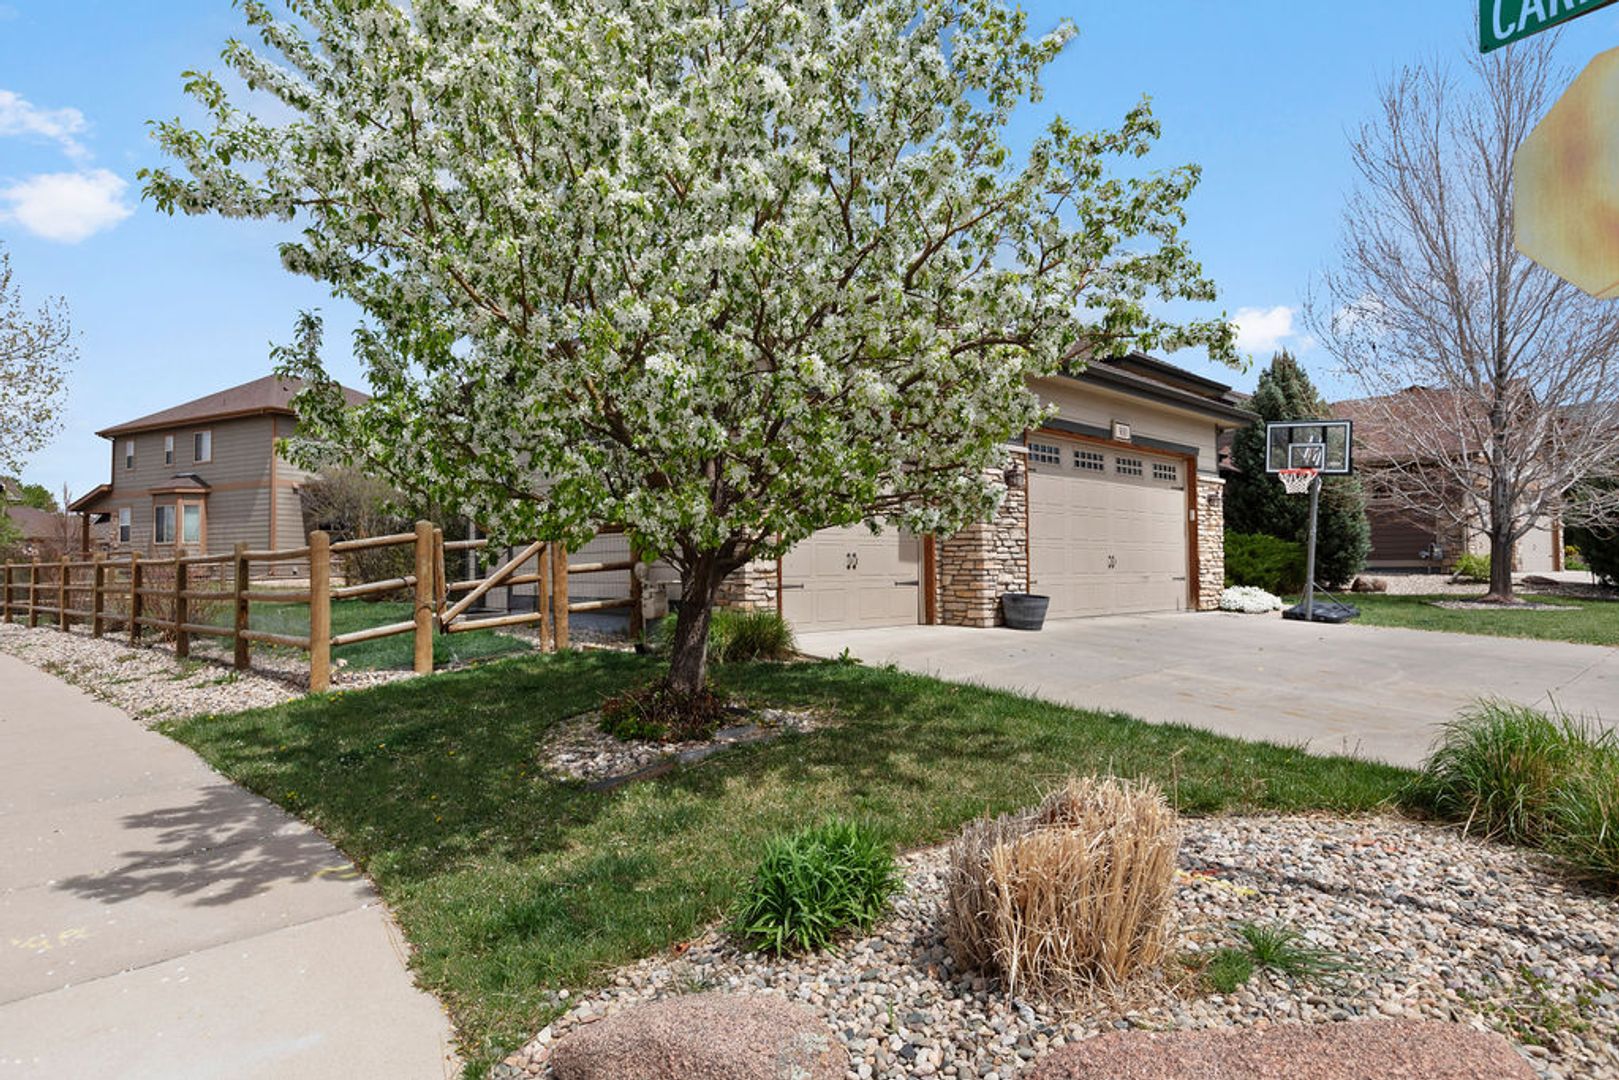 Desirable Ranch home in Clydesdale Park